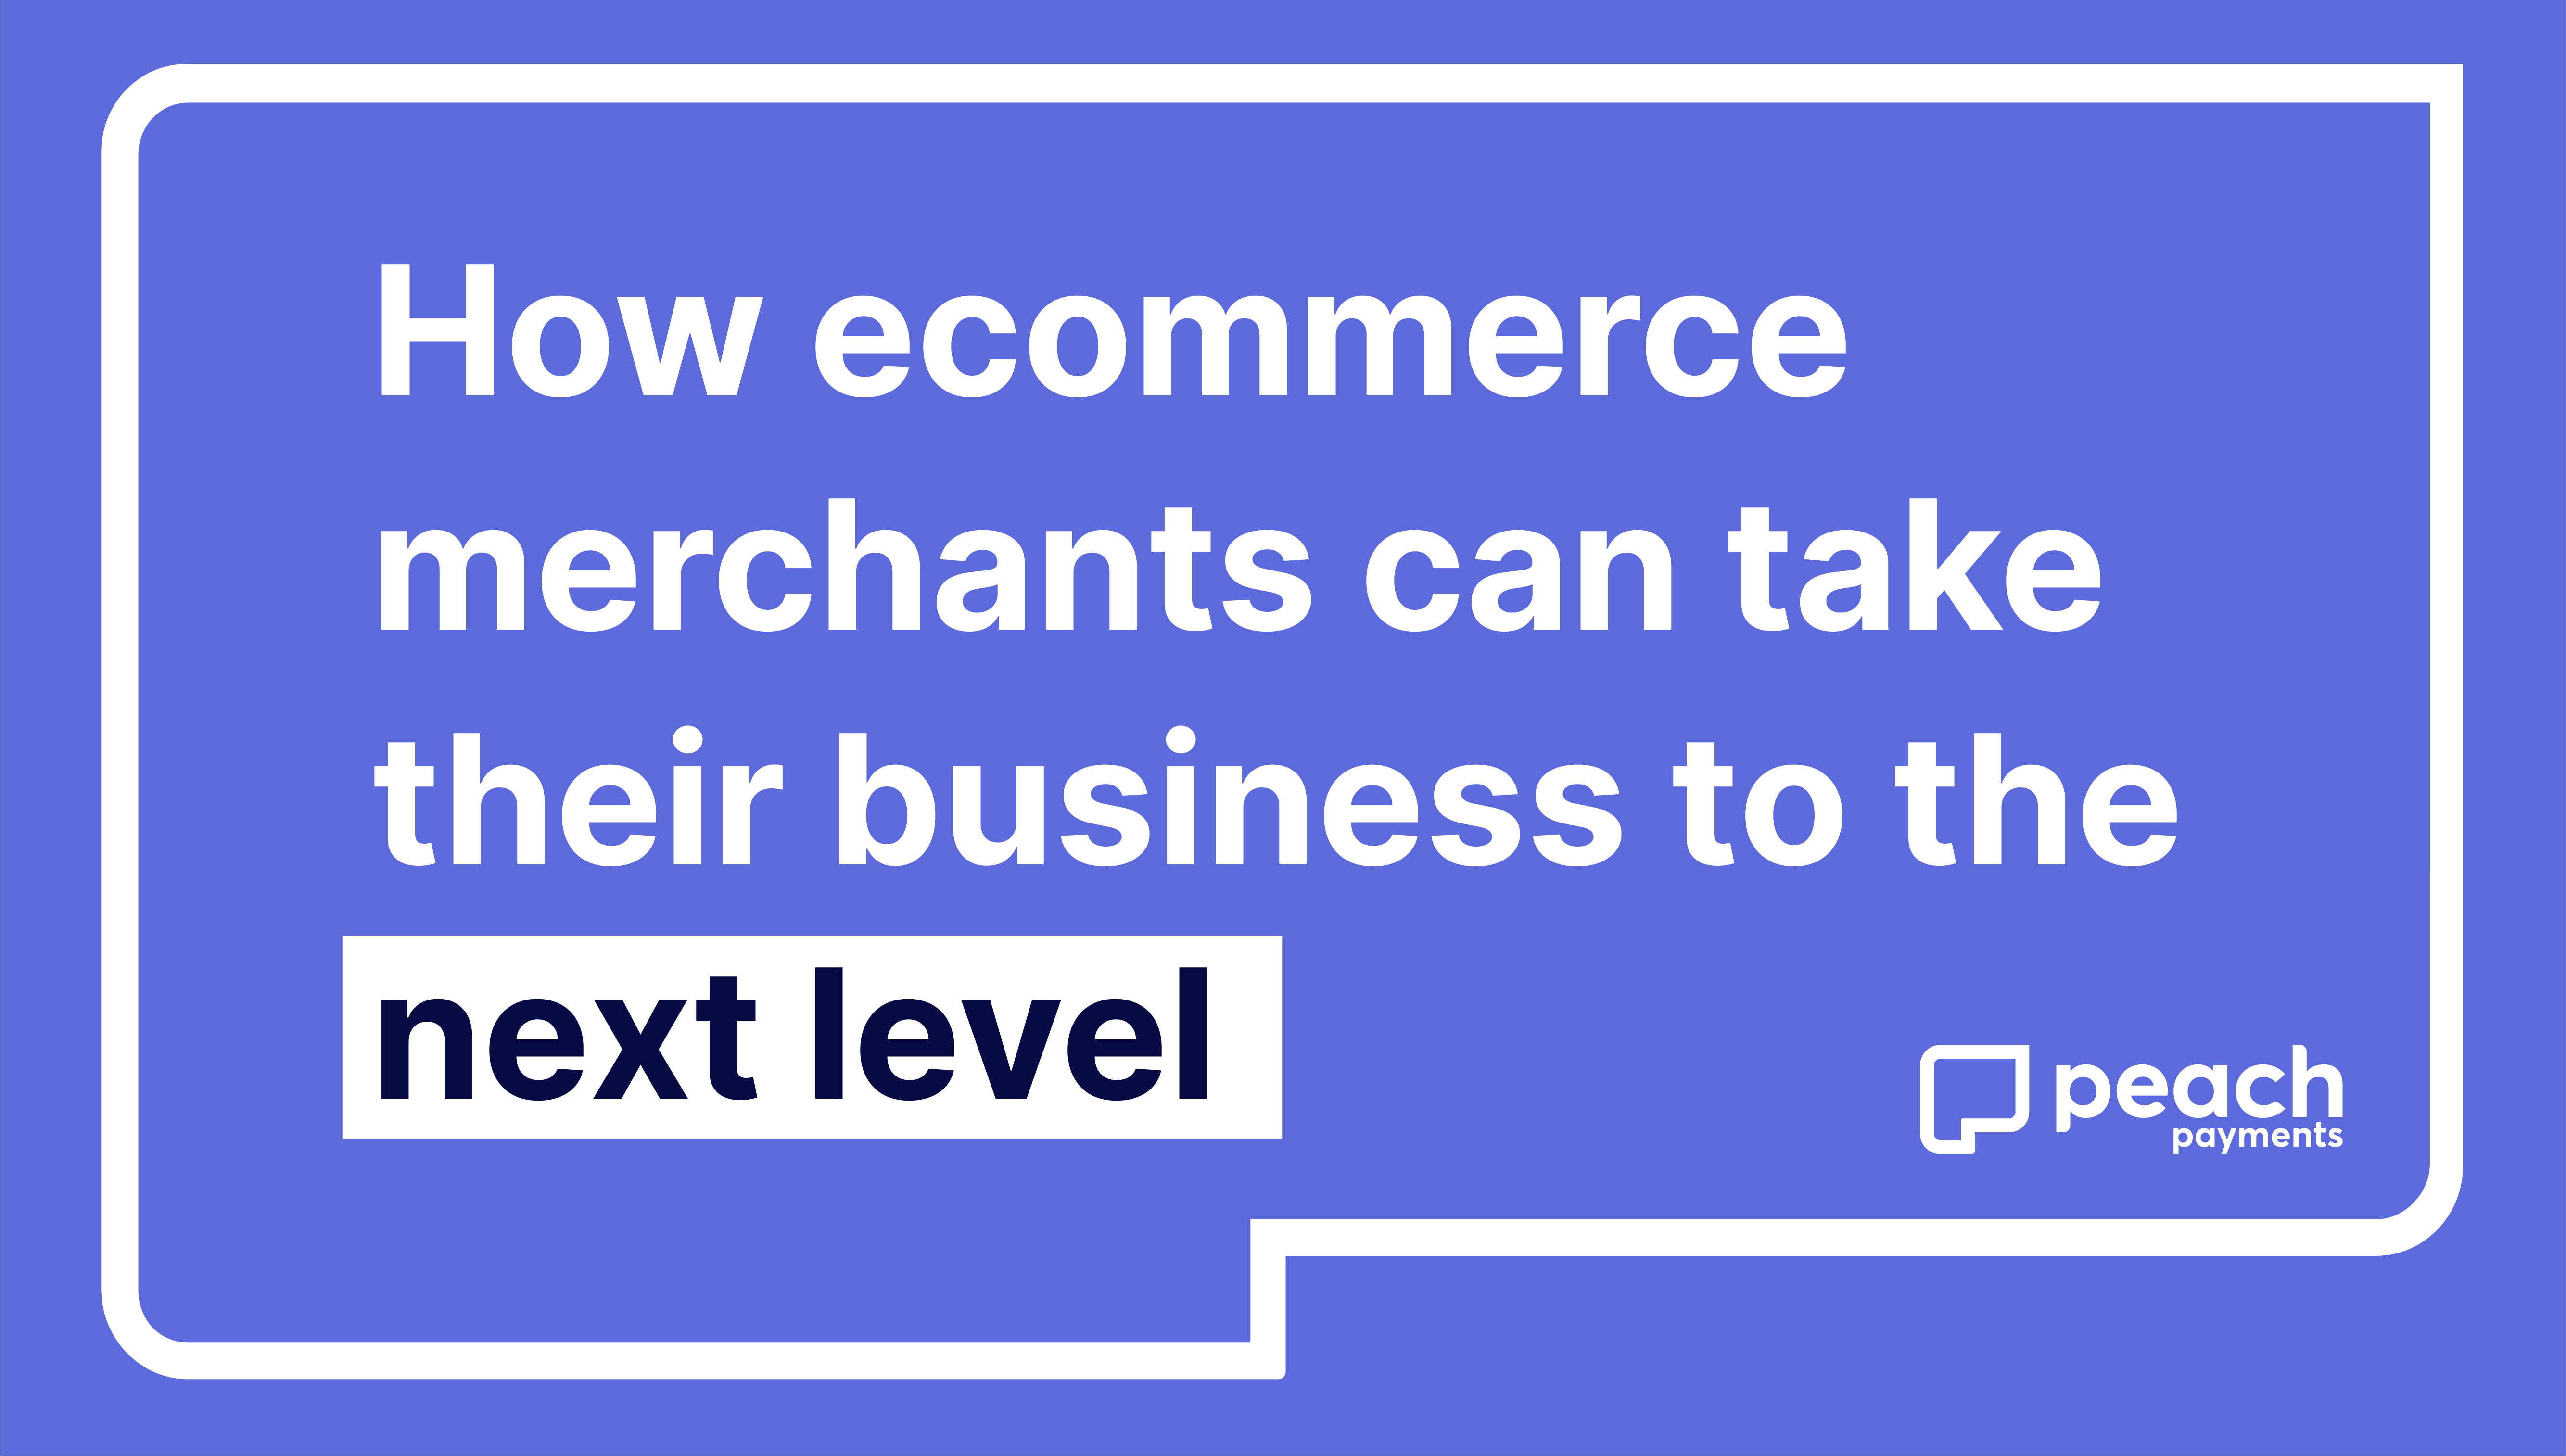 How ecommerce merchants can take their businesses to the next level